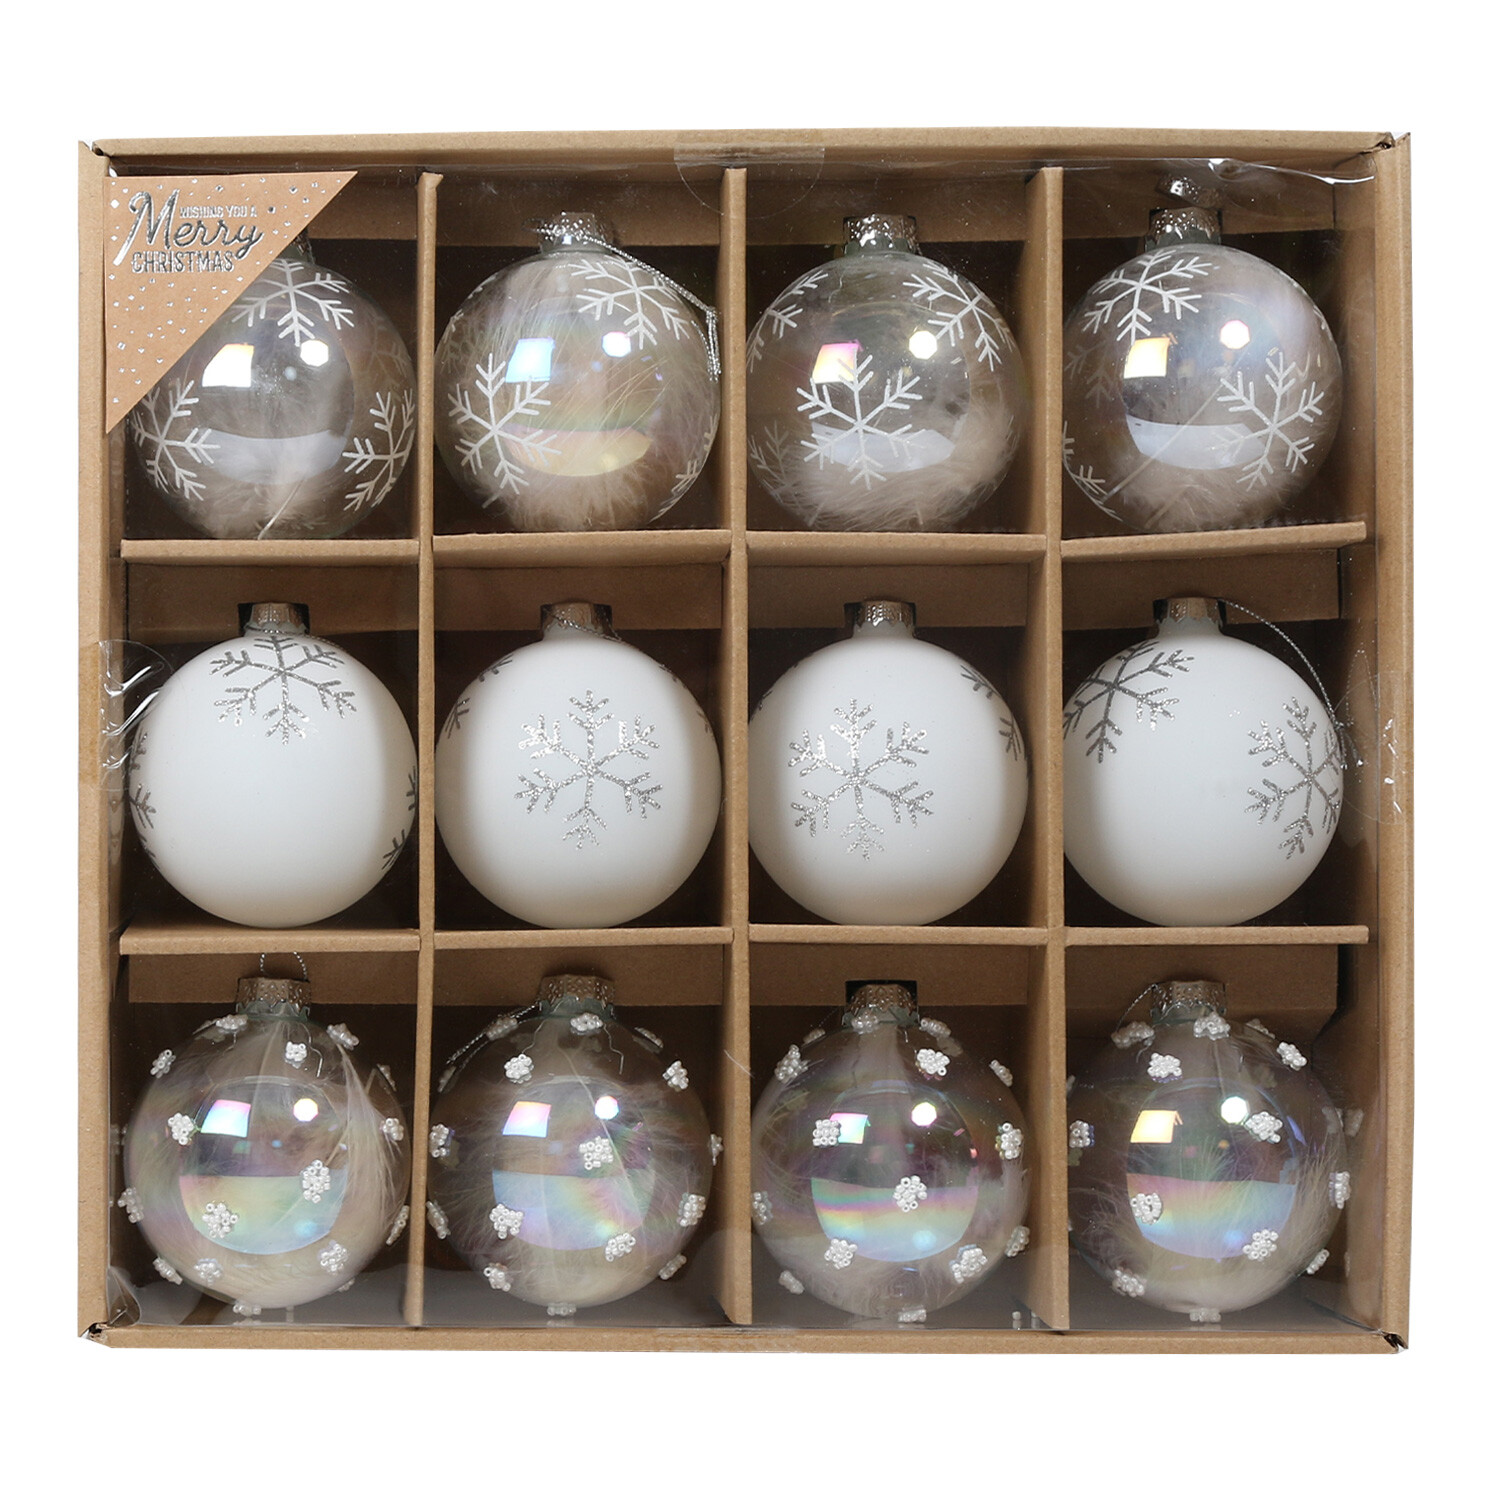 Frosted Fairytale White Snowflake Christmas Baubles 12 Pack Image